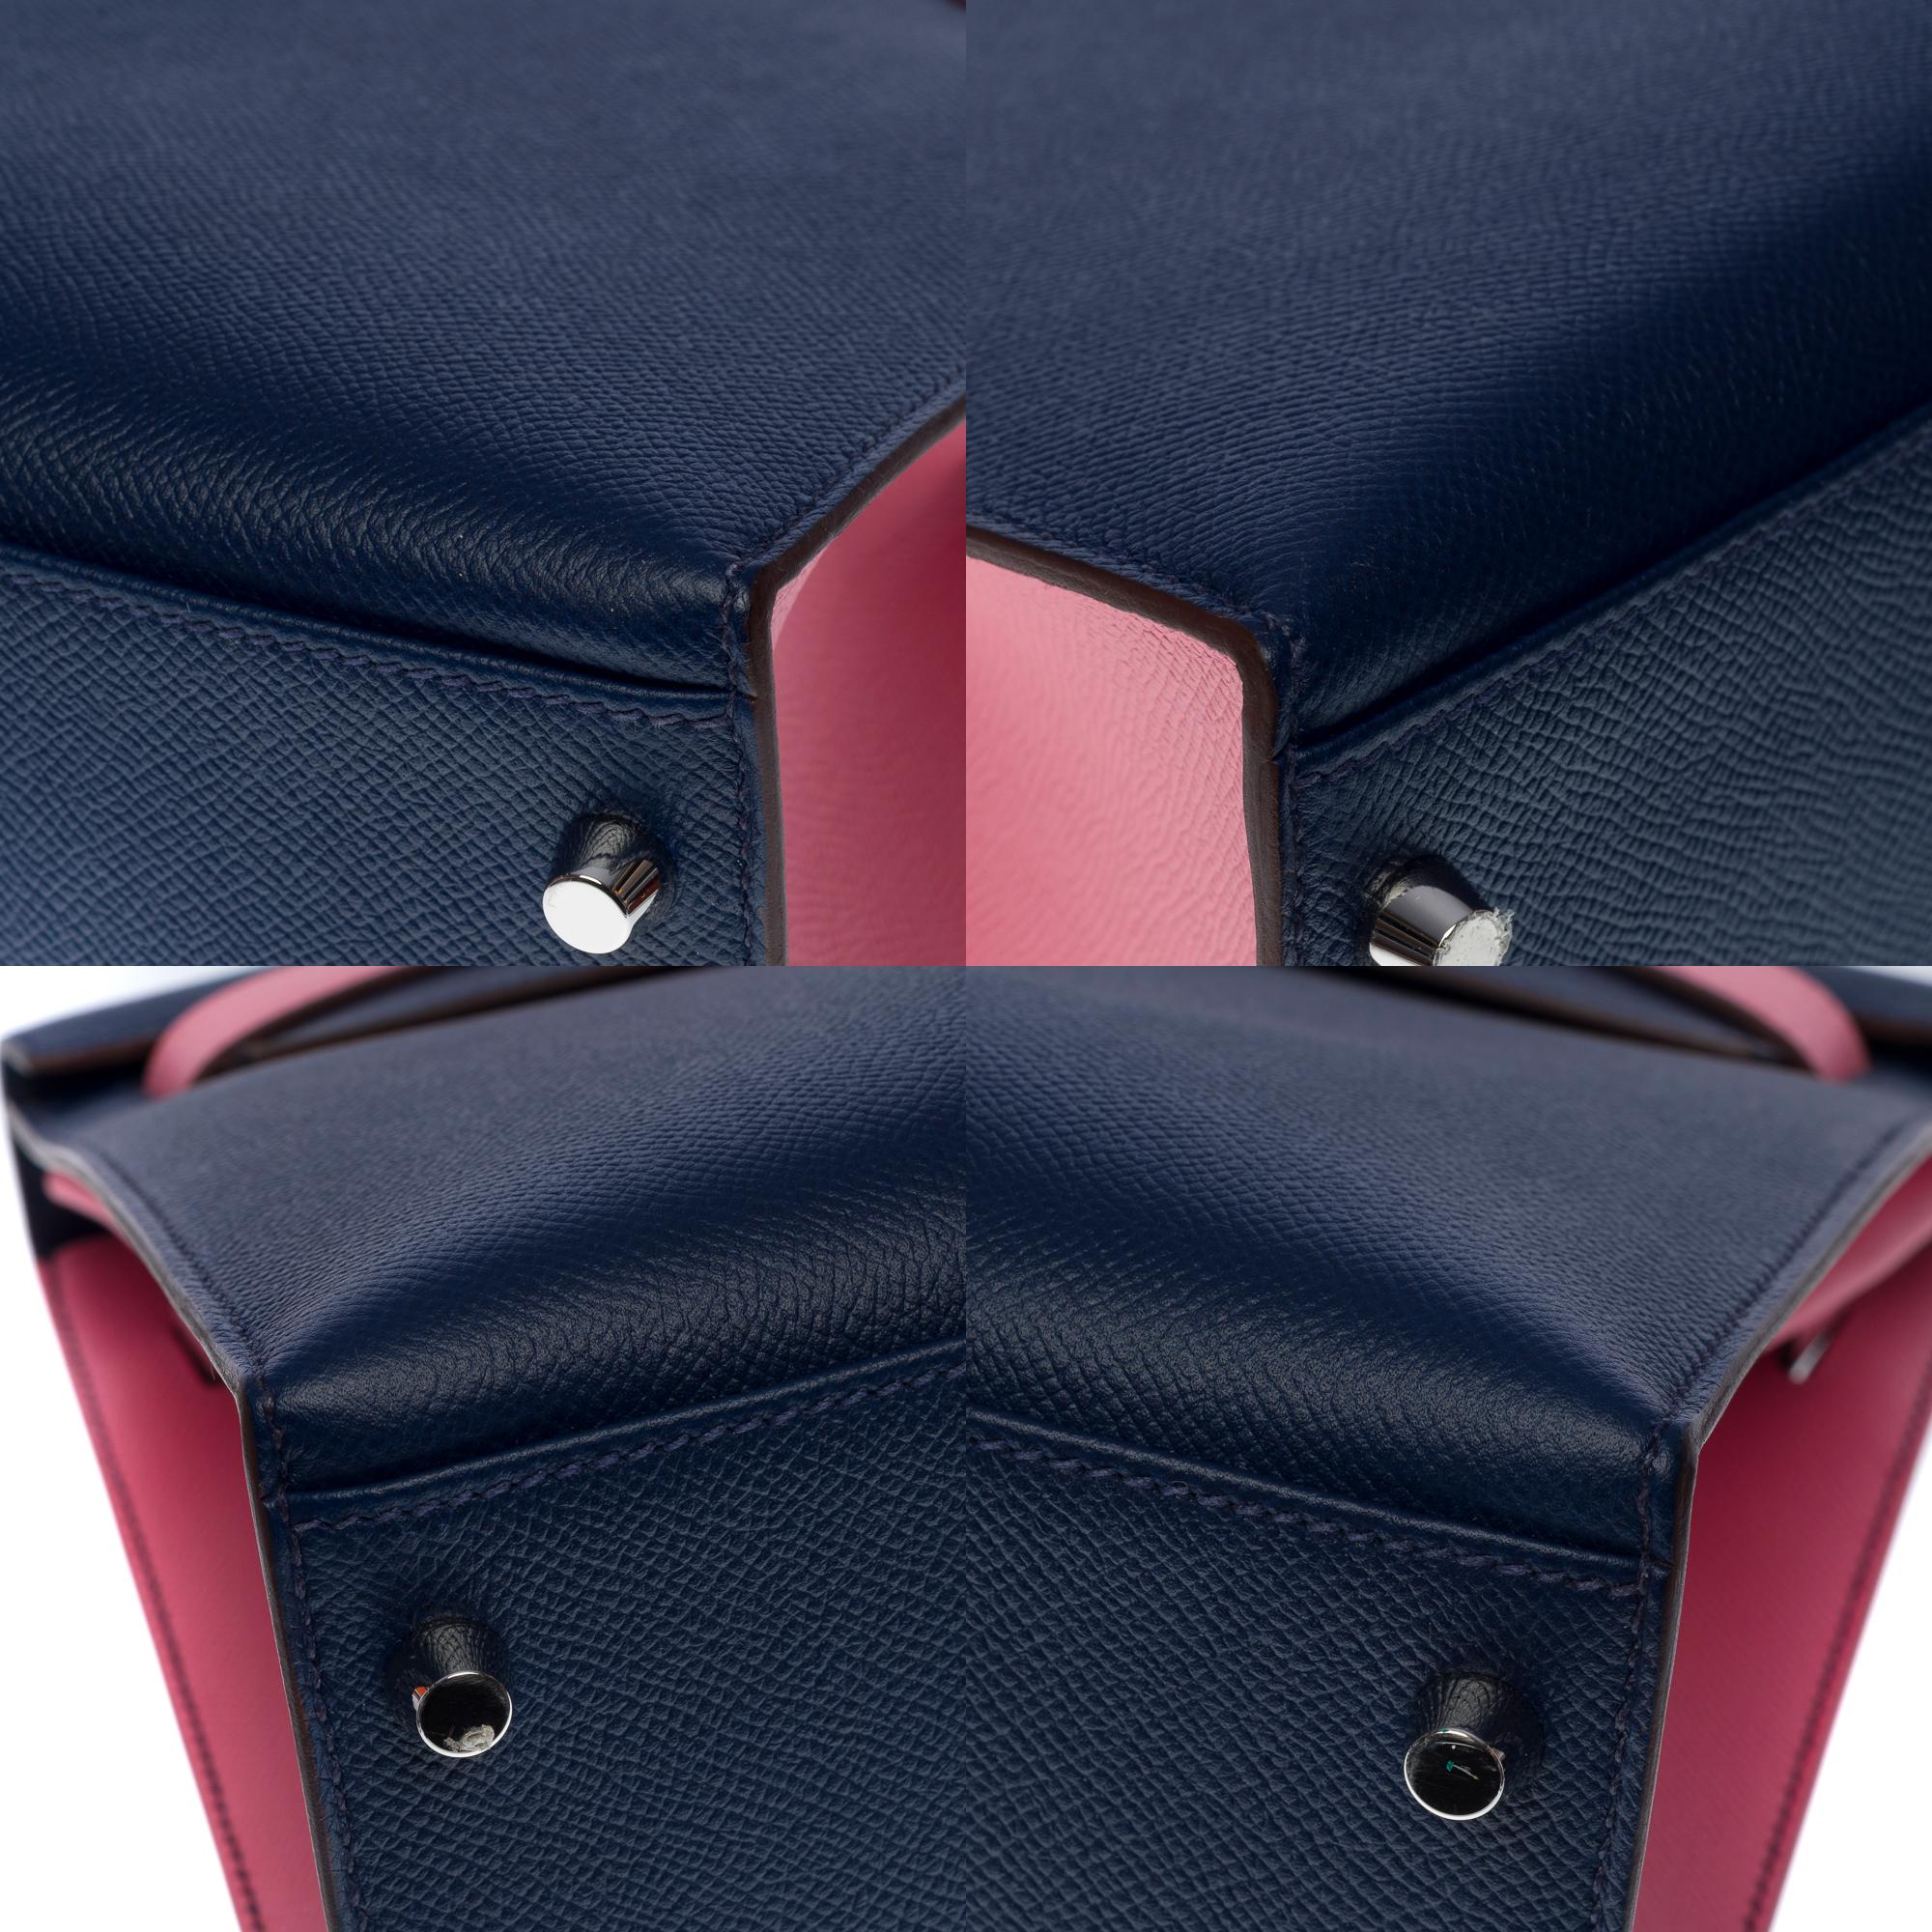 Hermès Kelly 32 sellier Special Order (HSS) in Pink and Blue Epsom leather, BSHW 7